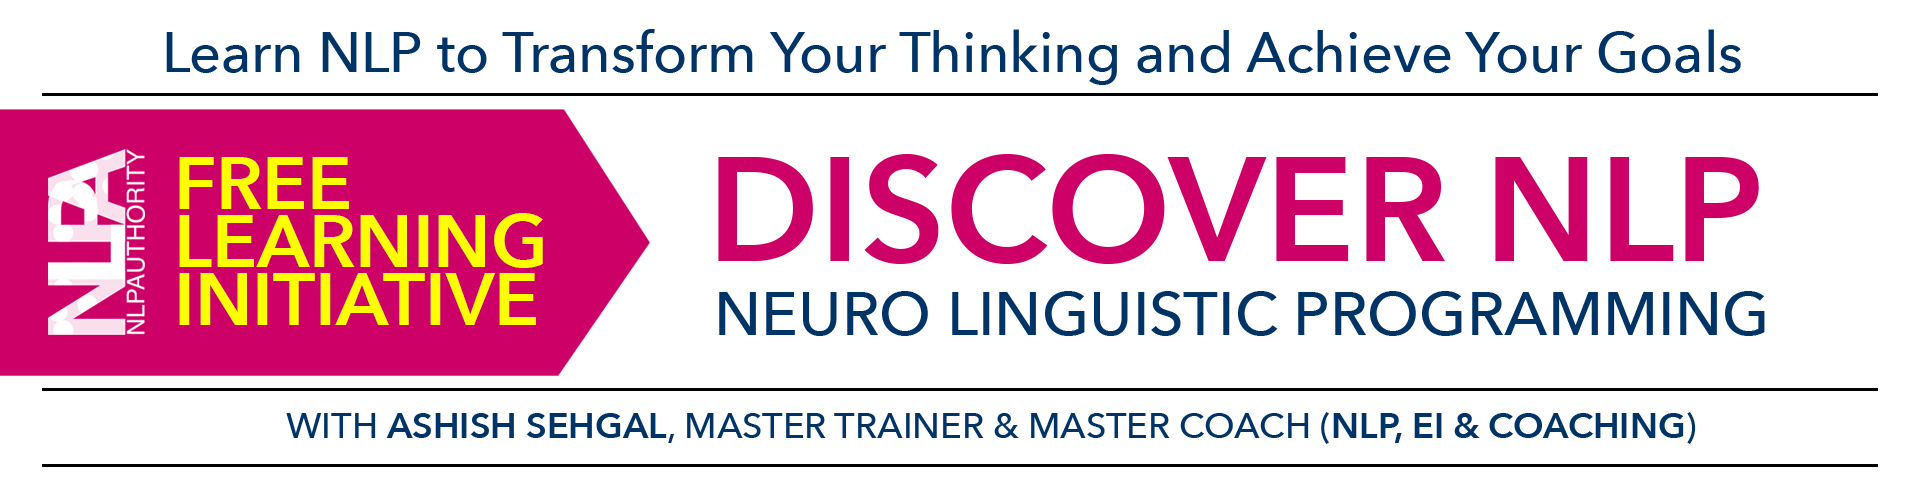 Discover NLP - Free NLP Training in Gurgaon